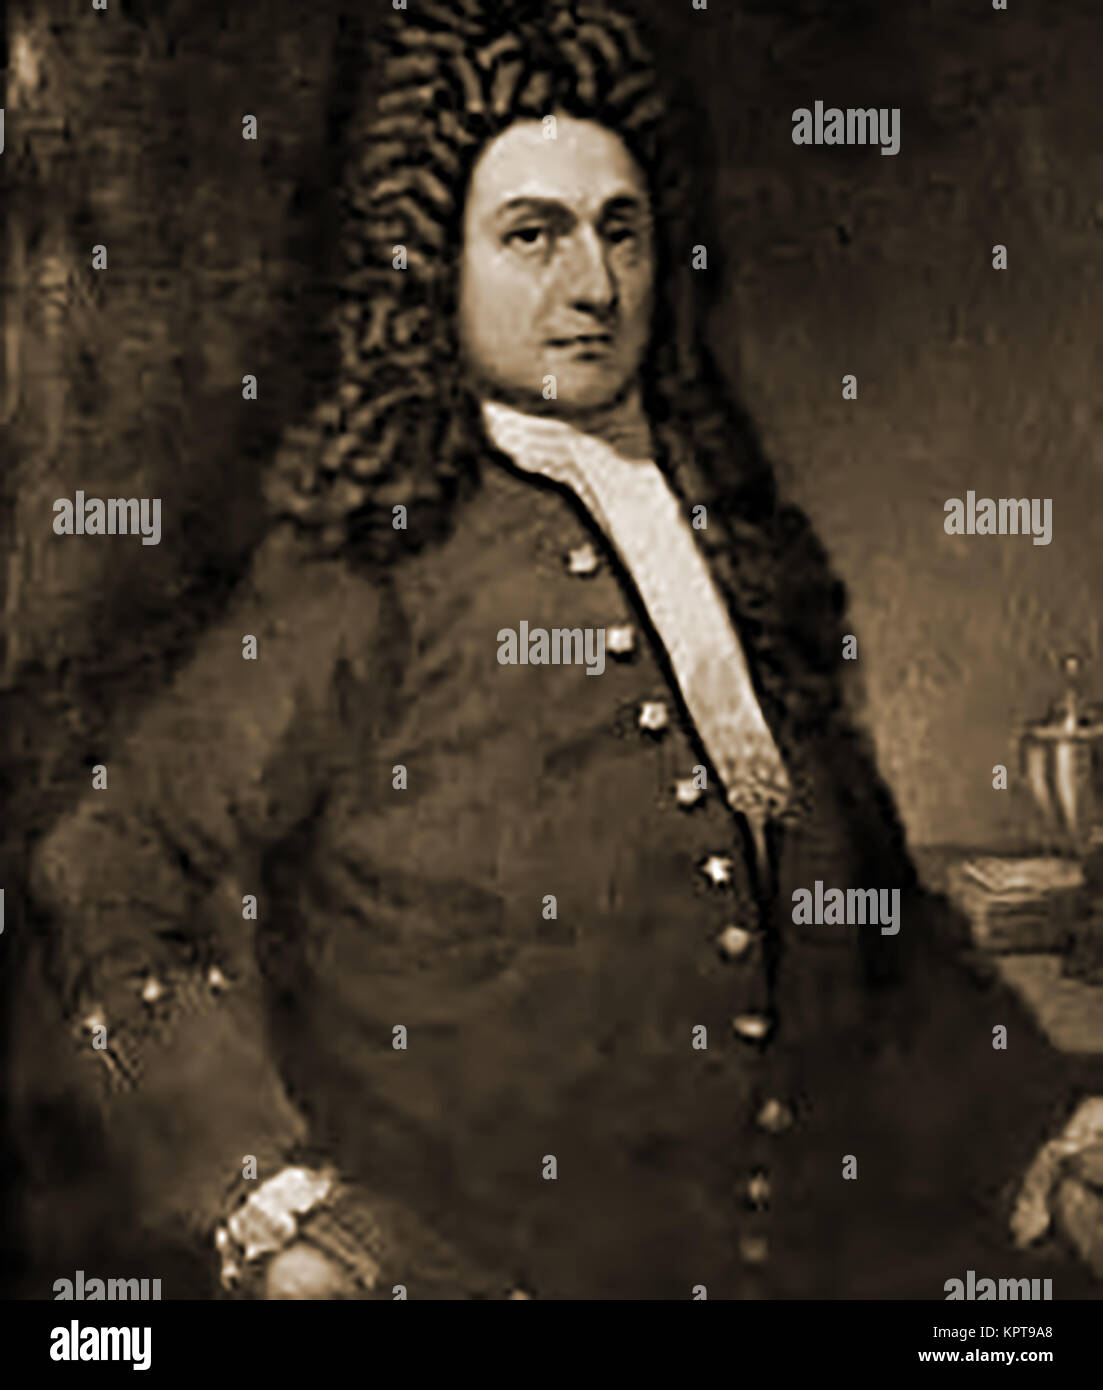 Gurton Saltonstall (aka Gurdon Saltonstall). A portrait of the of 10th  (25th) governor of the colony of Connecticut,   USA - A commander of the Connecticut militia and Chief Justice of its Superior Court Stock Photo